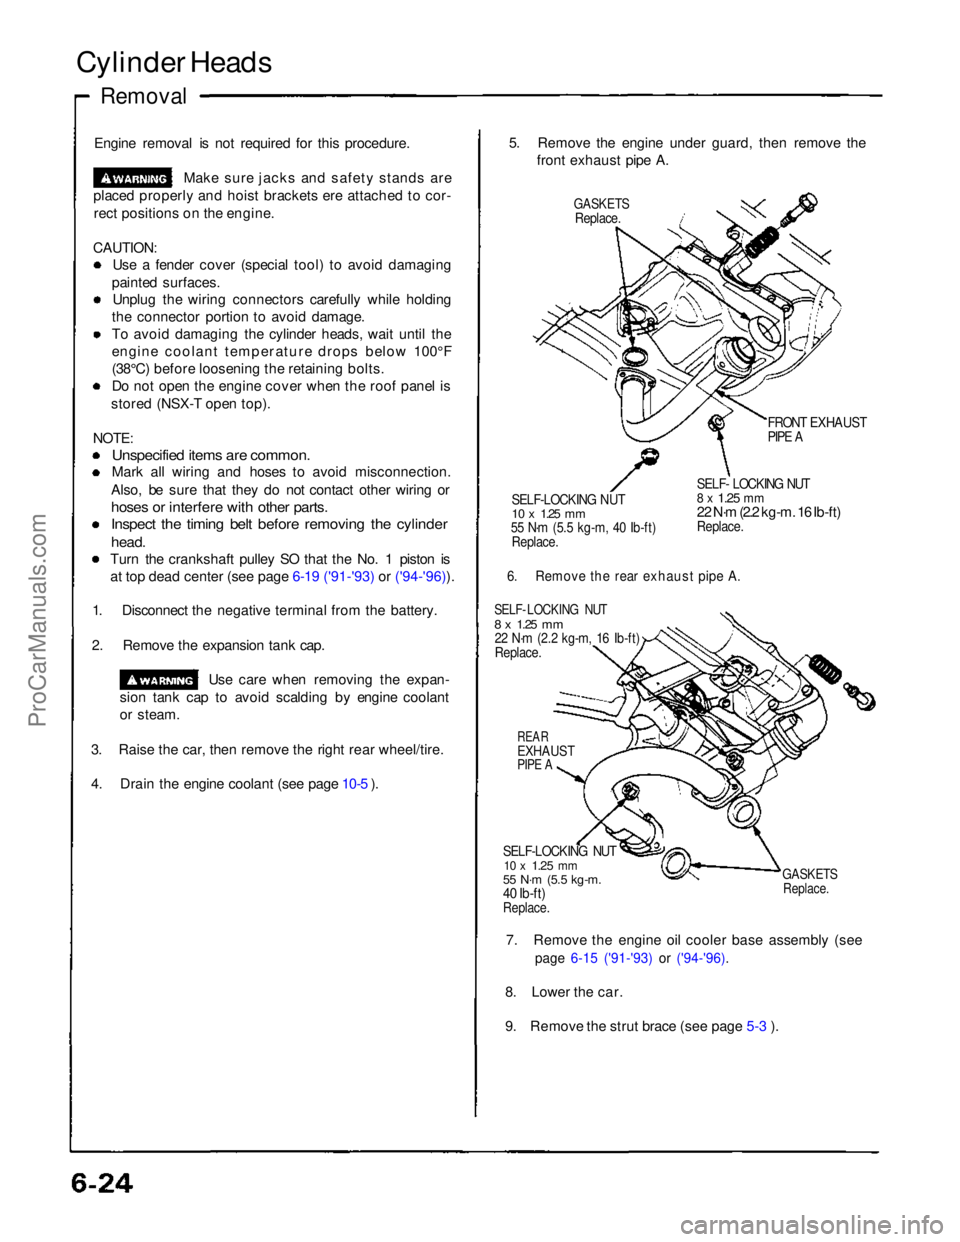 ACURA NSX 1991  Service Repair Manual 
Cylinder Heads

Removal

Engine removal is not required for this procedure. Make sure jacks and safety stands are
placed properly and hoist brackets ere attached to cor- rect positions on the engine.